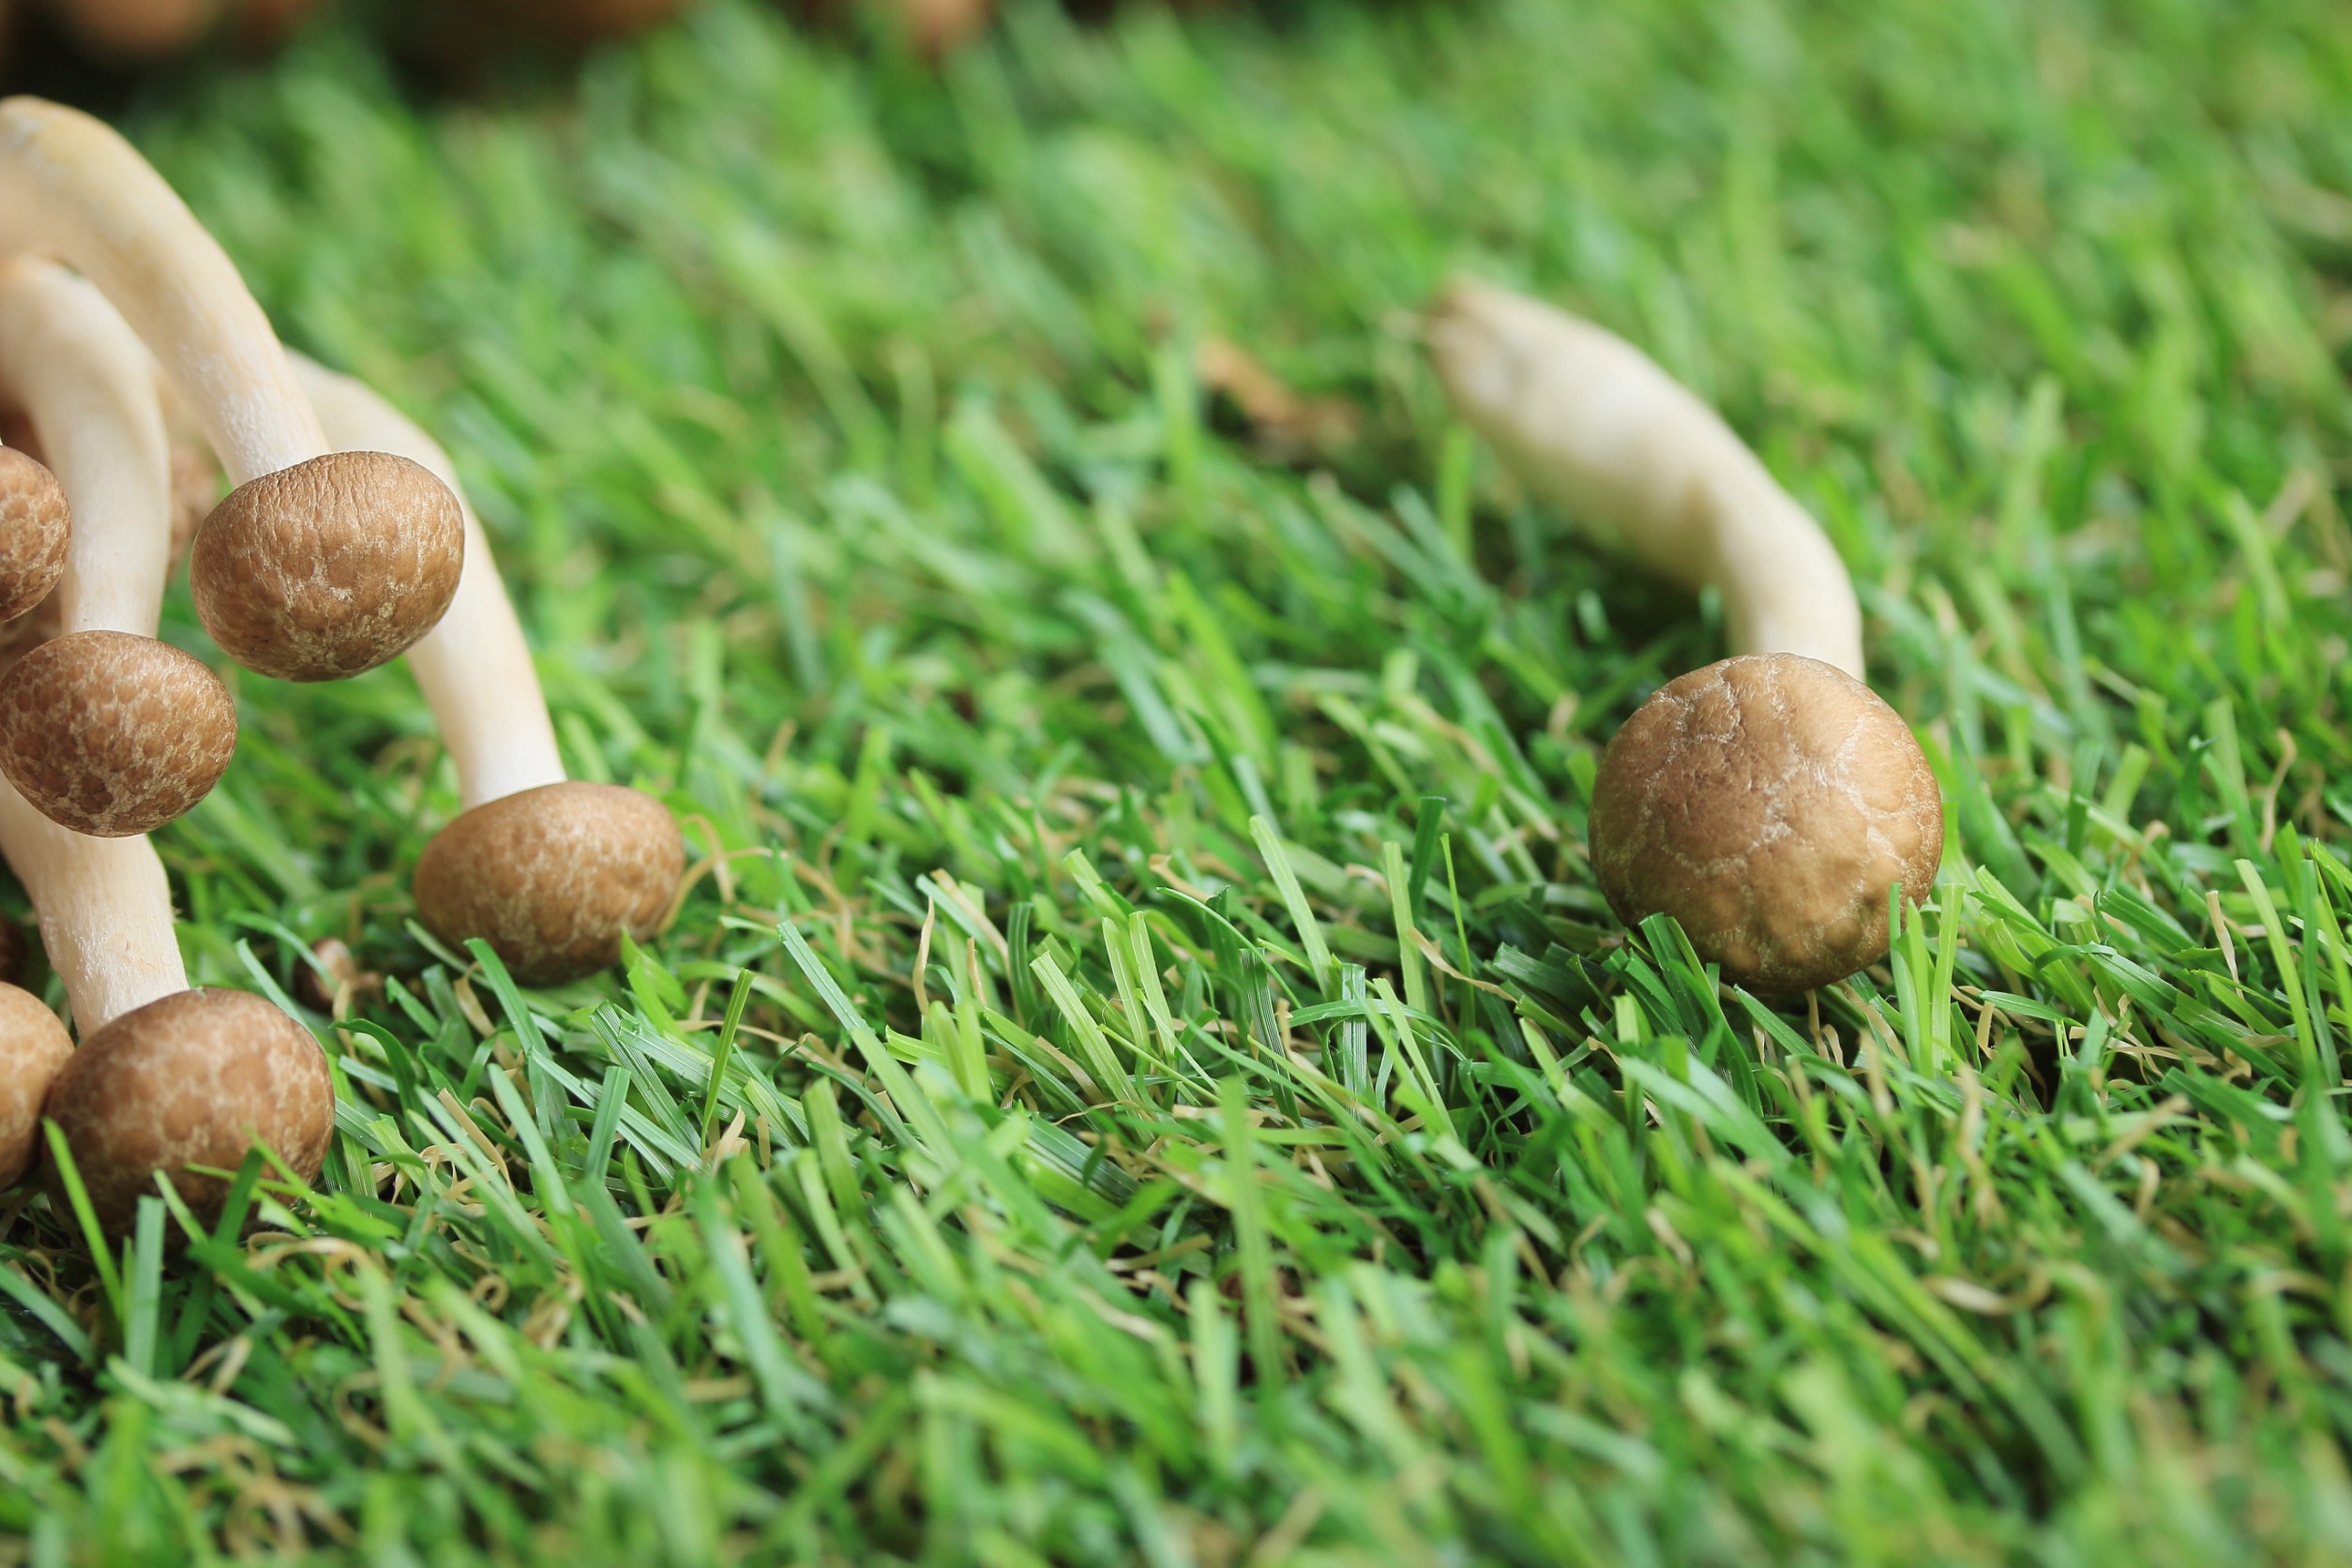 How Do You Kill Mushrooms in Lawn?